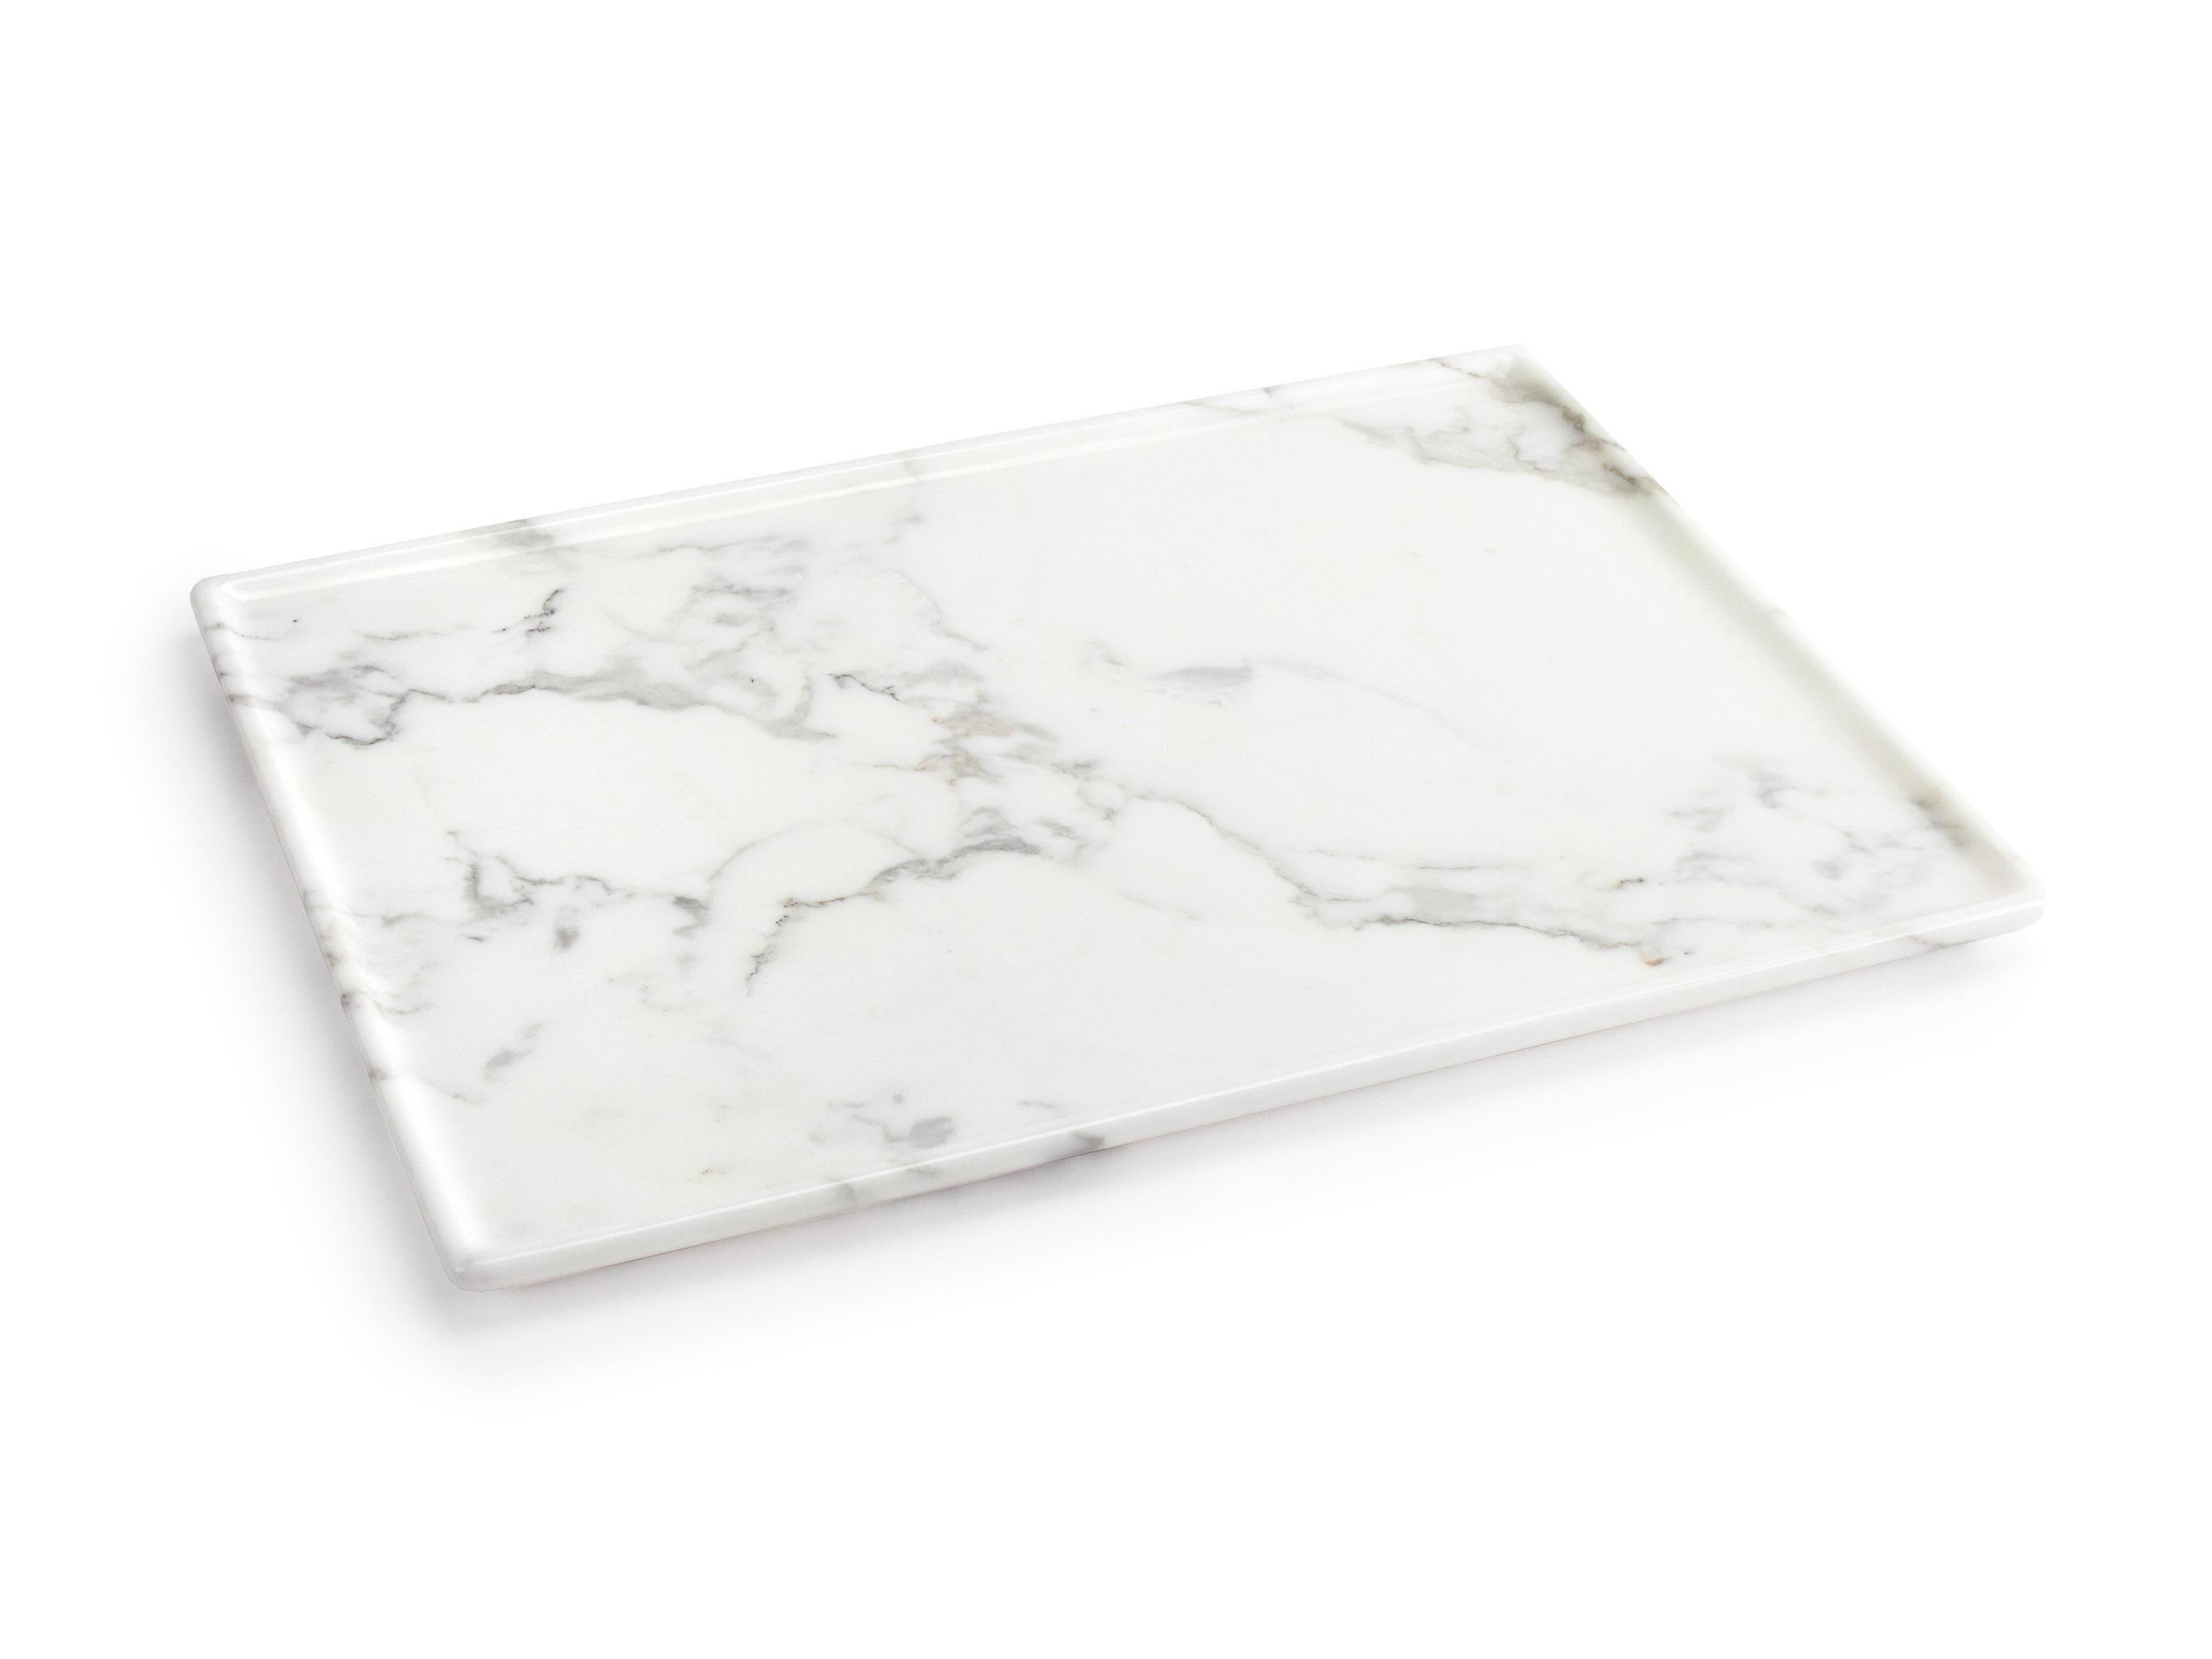 Contemporary Tray Hand Carved from Solid Block of White Marble, Rectangular, Made in Italy For Sale